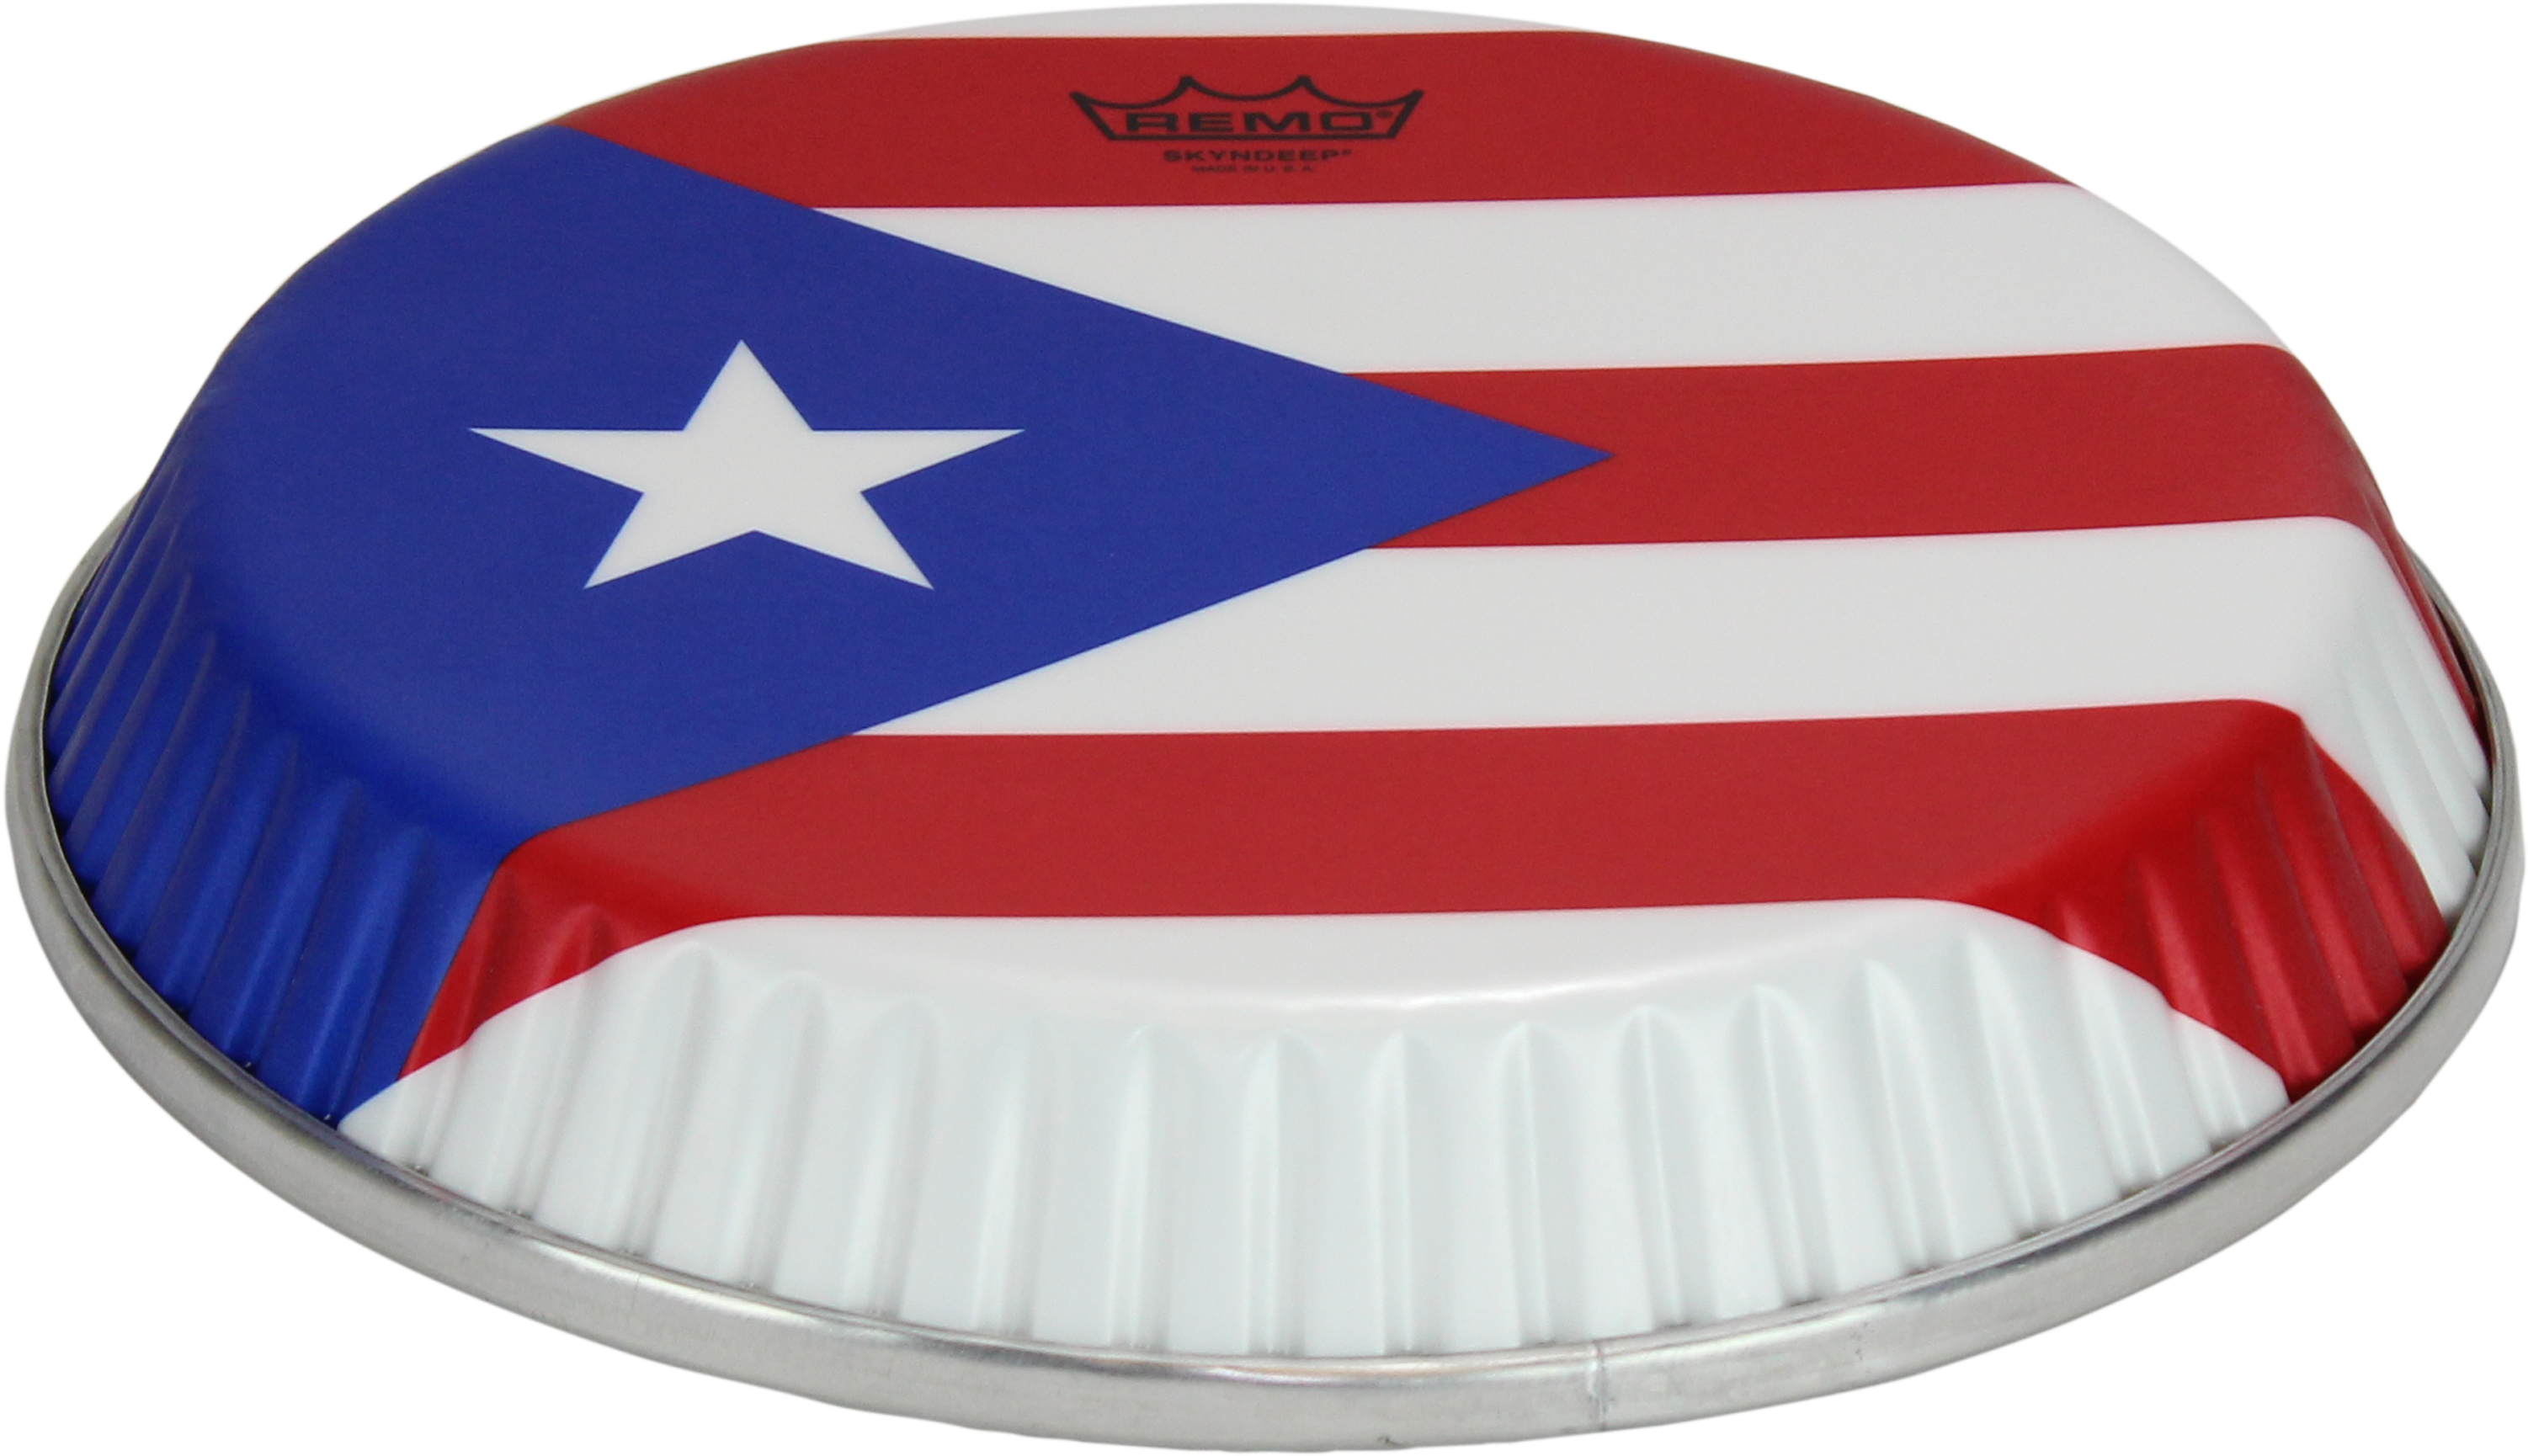 Remo Symmetry Skyndeep Conga Drumhead-puerto Rican - M4 1075 S6 D2008 (3304x3456)